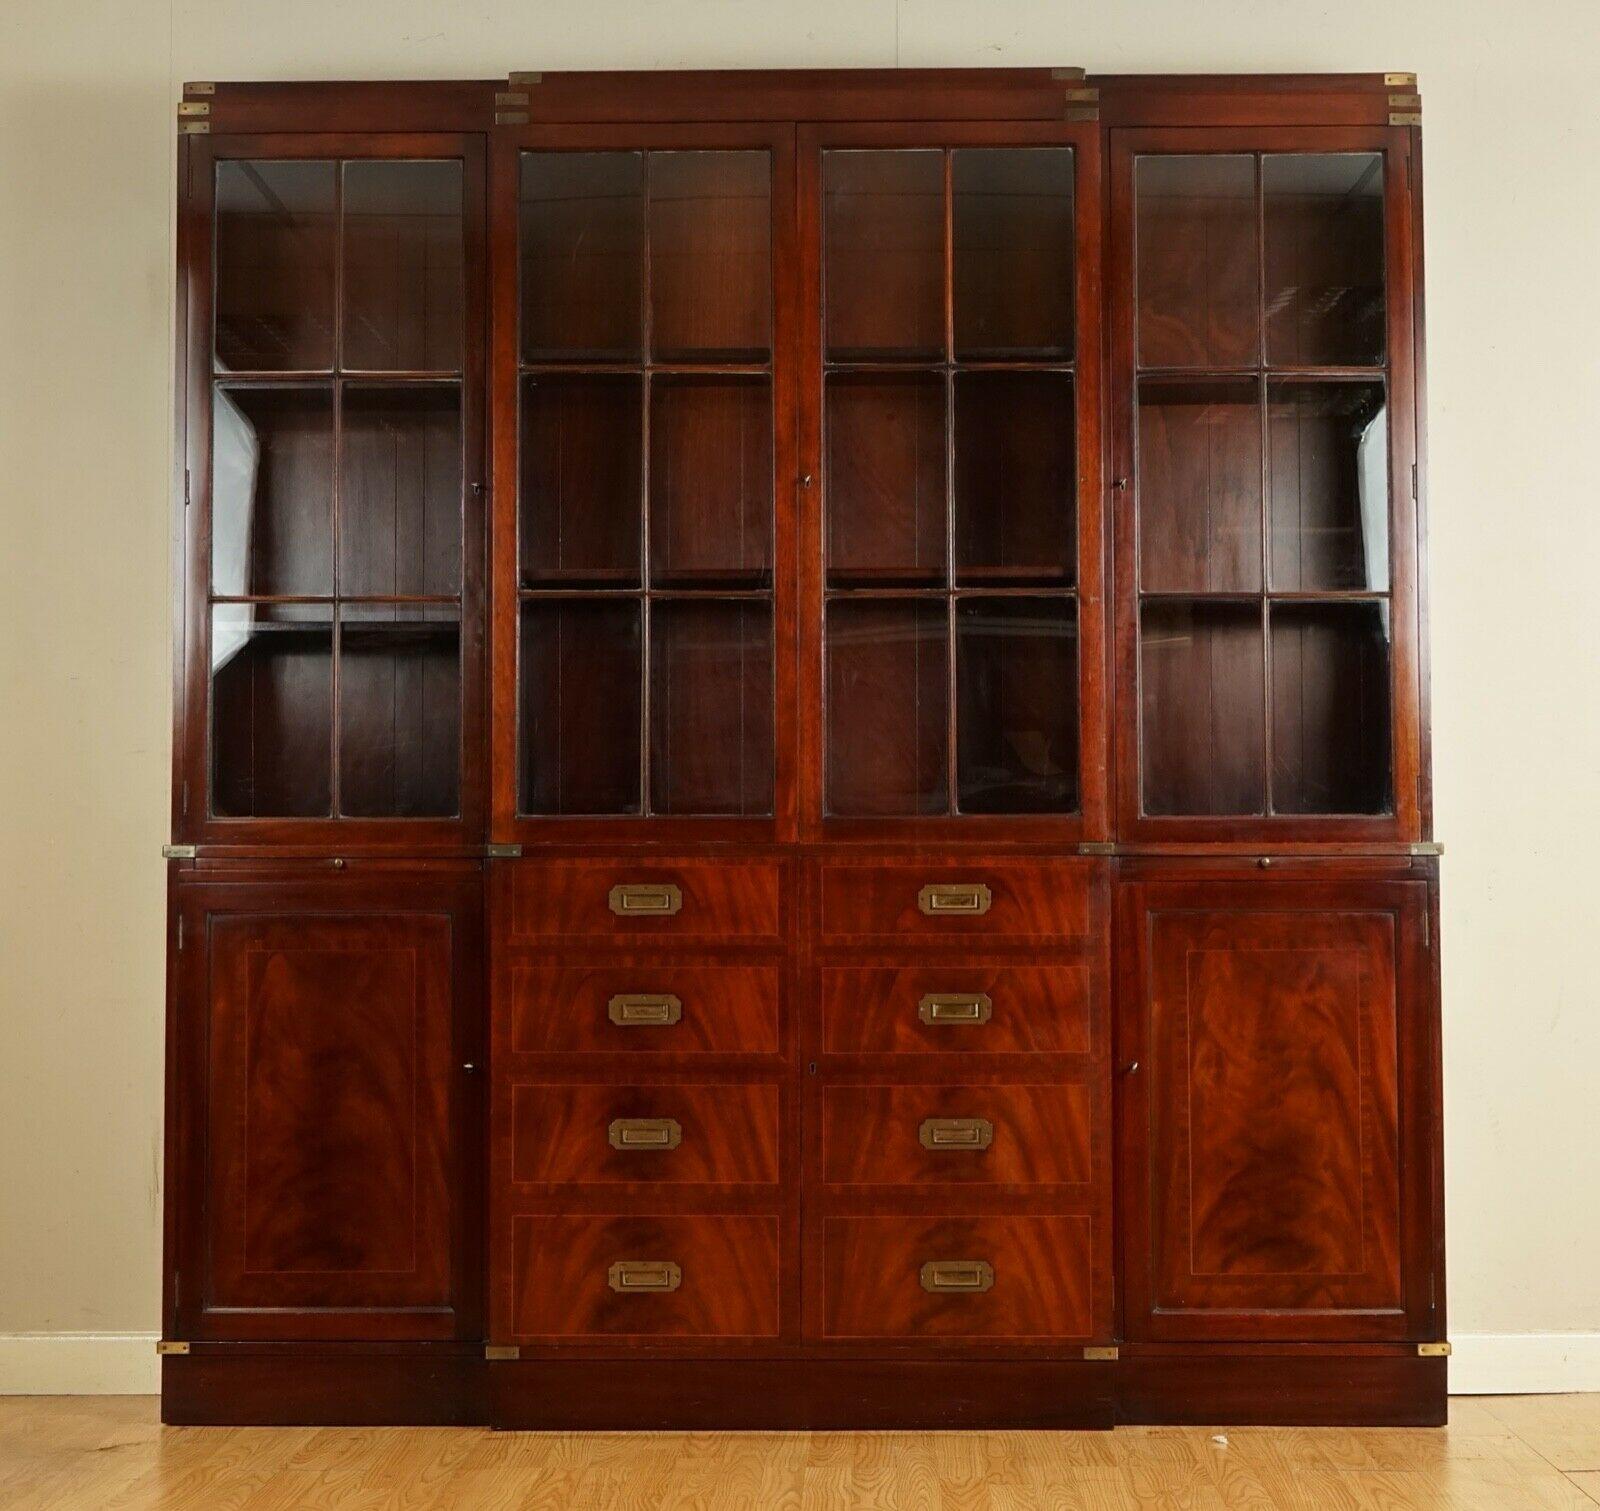 We are delighted to offer for sale this Harrods Kennedy Flamed Mahogany Military Campaign Library Display Cabinet.

This piece is becoming popular and highly collectable over the years, campaign has been around for many, many years and it's becoming